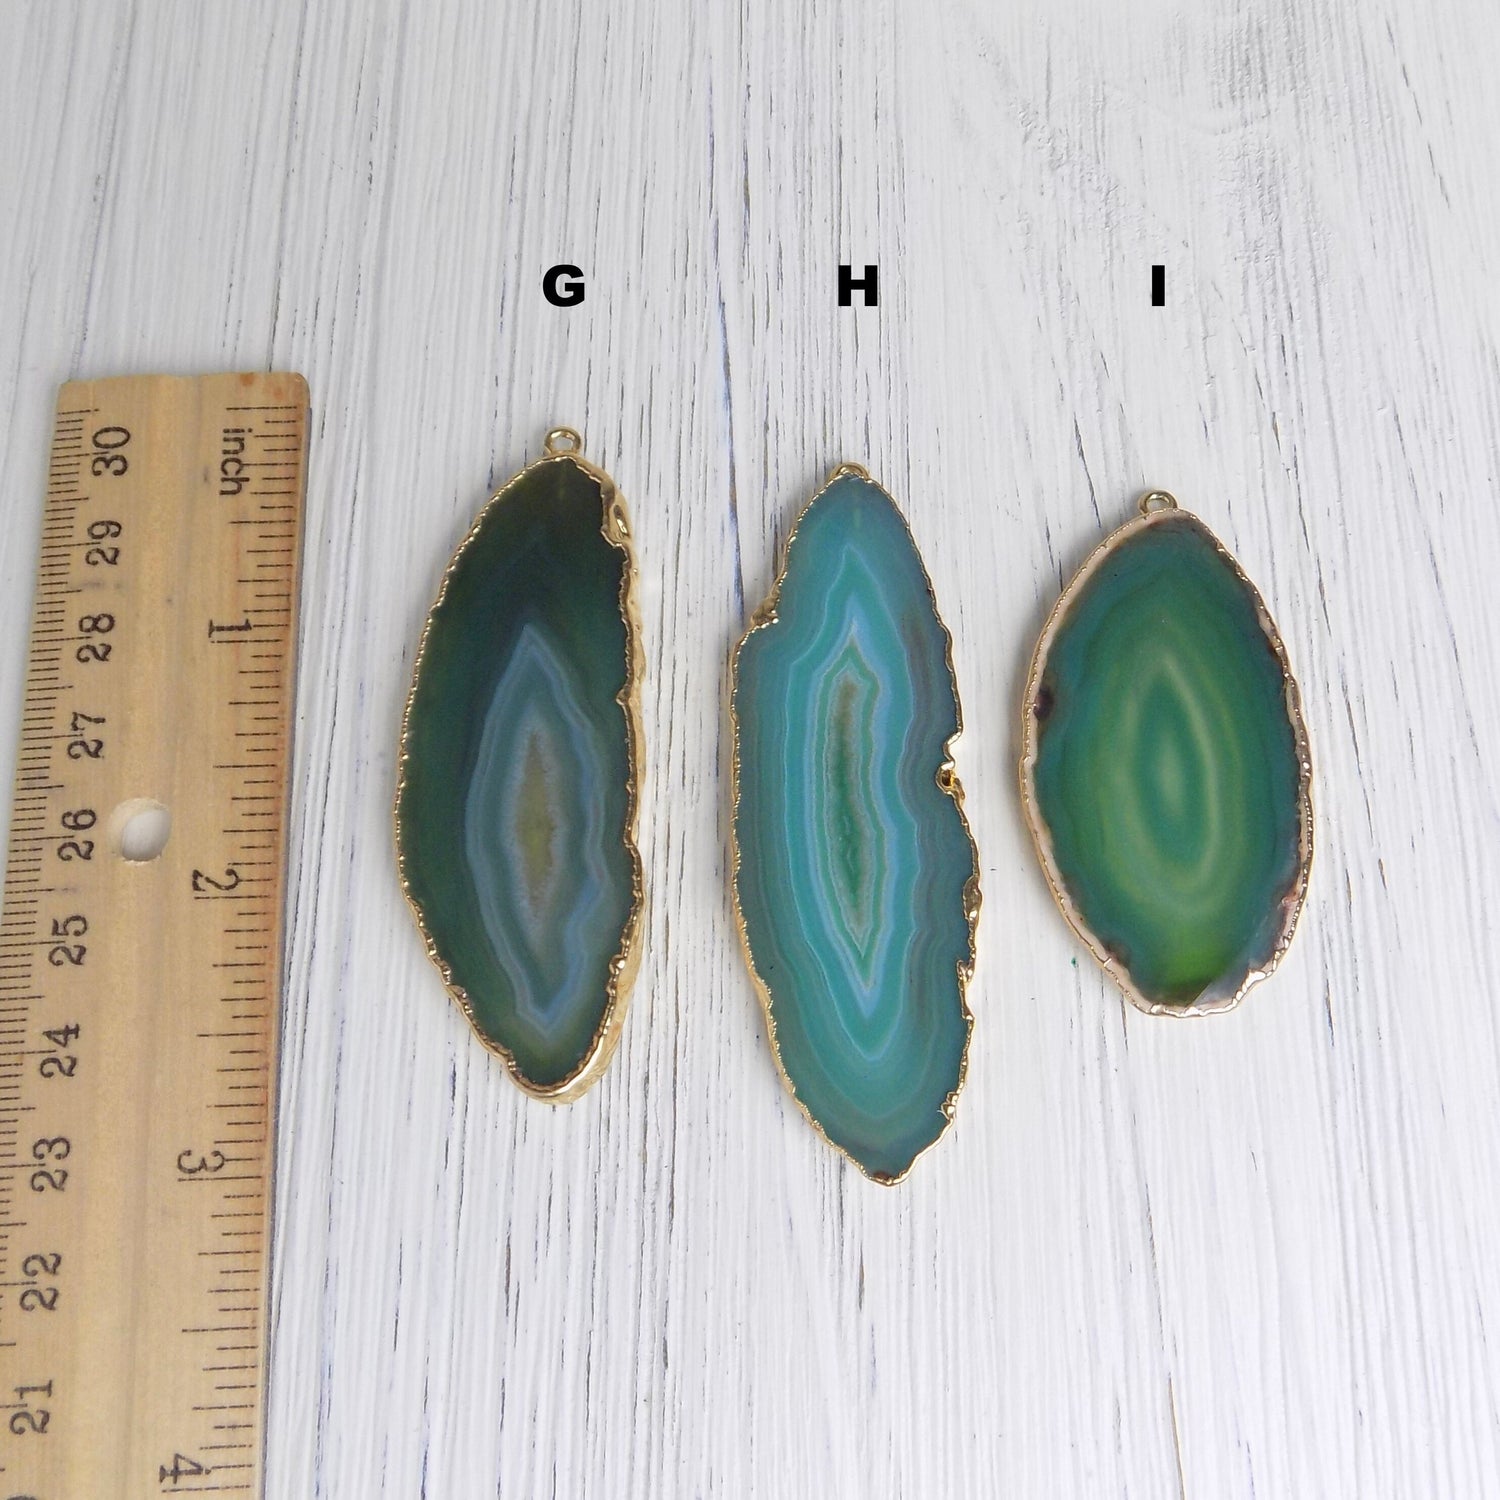 Boho Agate Necklace - Green Agate Necklace - Slice Agate Pendant - Geode Necklace - Gold Layering Necklace Custom - Wife Gift Women - 11-686